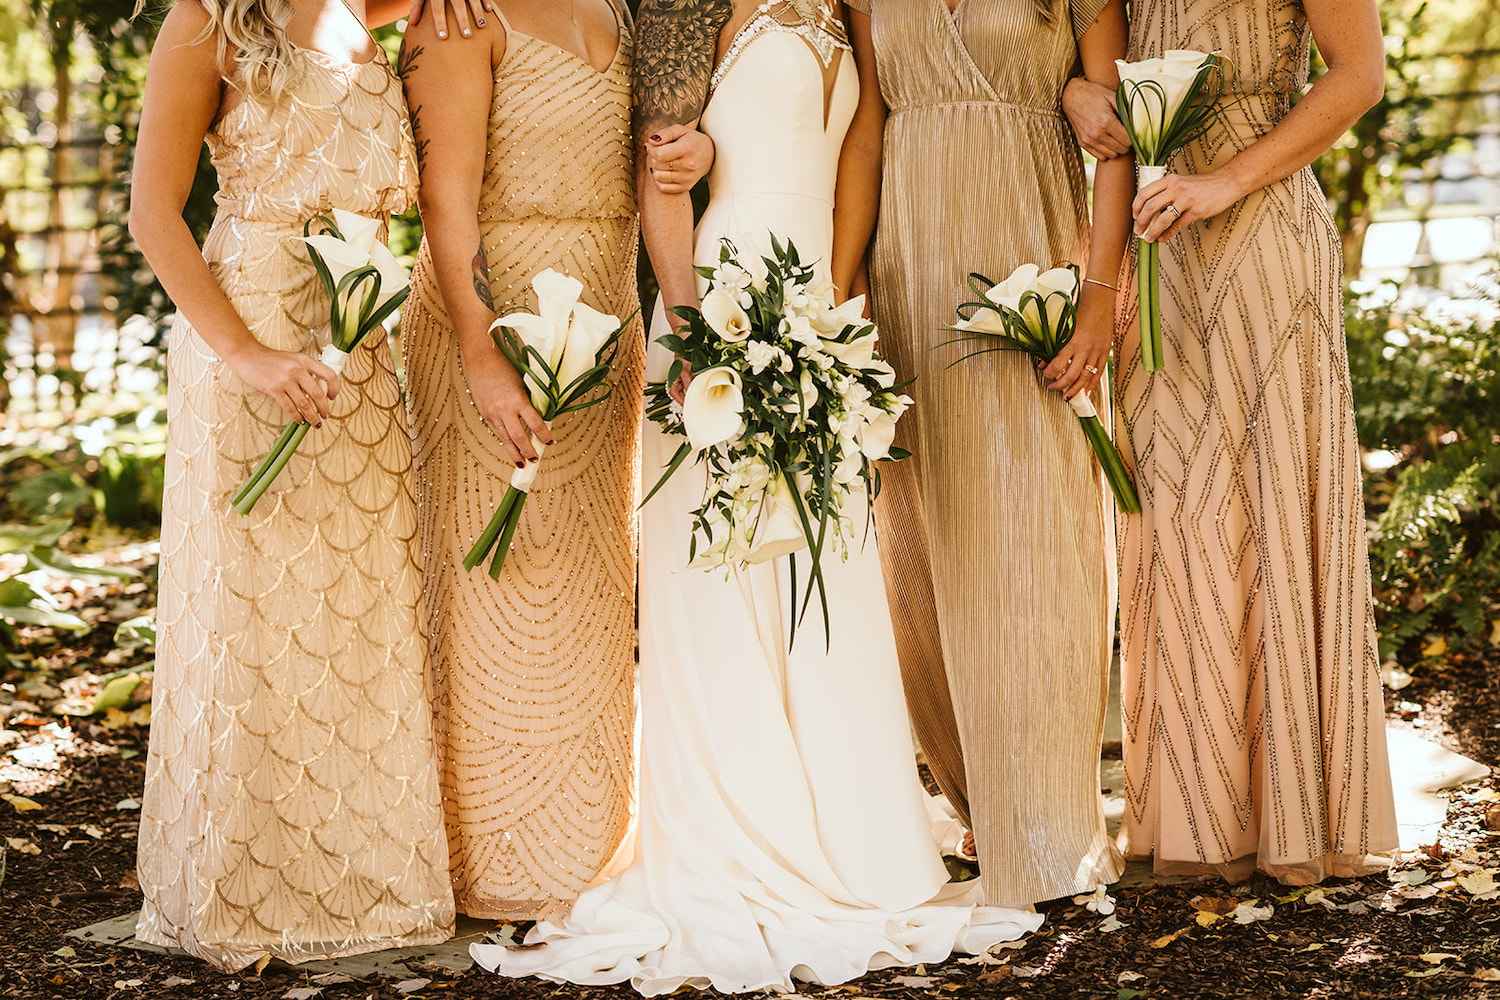 bride stands between bridesmaids who wear cream and gold dreses. they all hold white calla lilies.